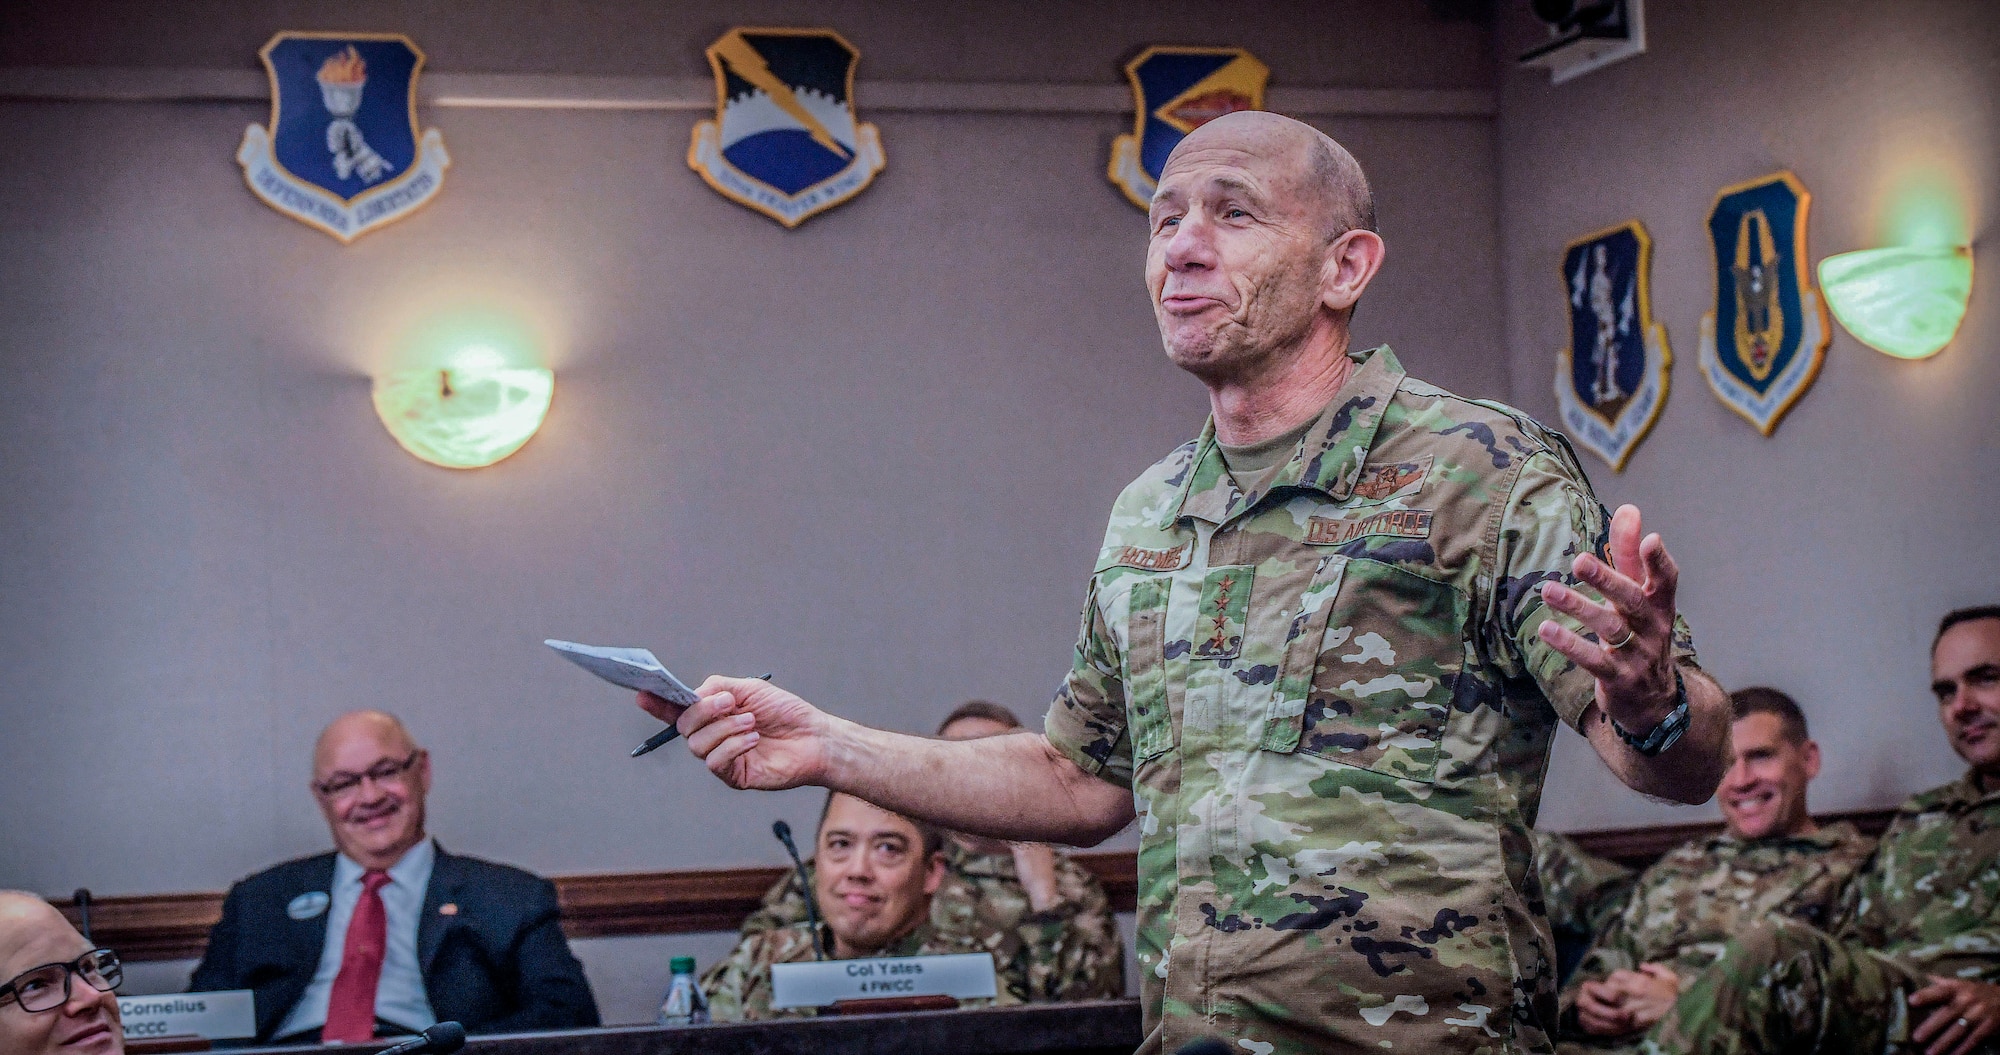 General Mike Holmes, commander of Air Combat Command, speaks to judges during ACC’s 2020 Spark Tank competition at the Creech Conference Center on Joint Base Langley-Eustis, Virginia, Oct. 16, 2019. Six teams of Airmen from bases across ACC presented their ideas. The winning teams will move on to the finals in Washington D.C. to compete at the Air Force level against finalists from other commands. (U.S. Air Force photo by Tech. Sgt. Nick Wilson)